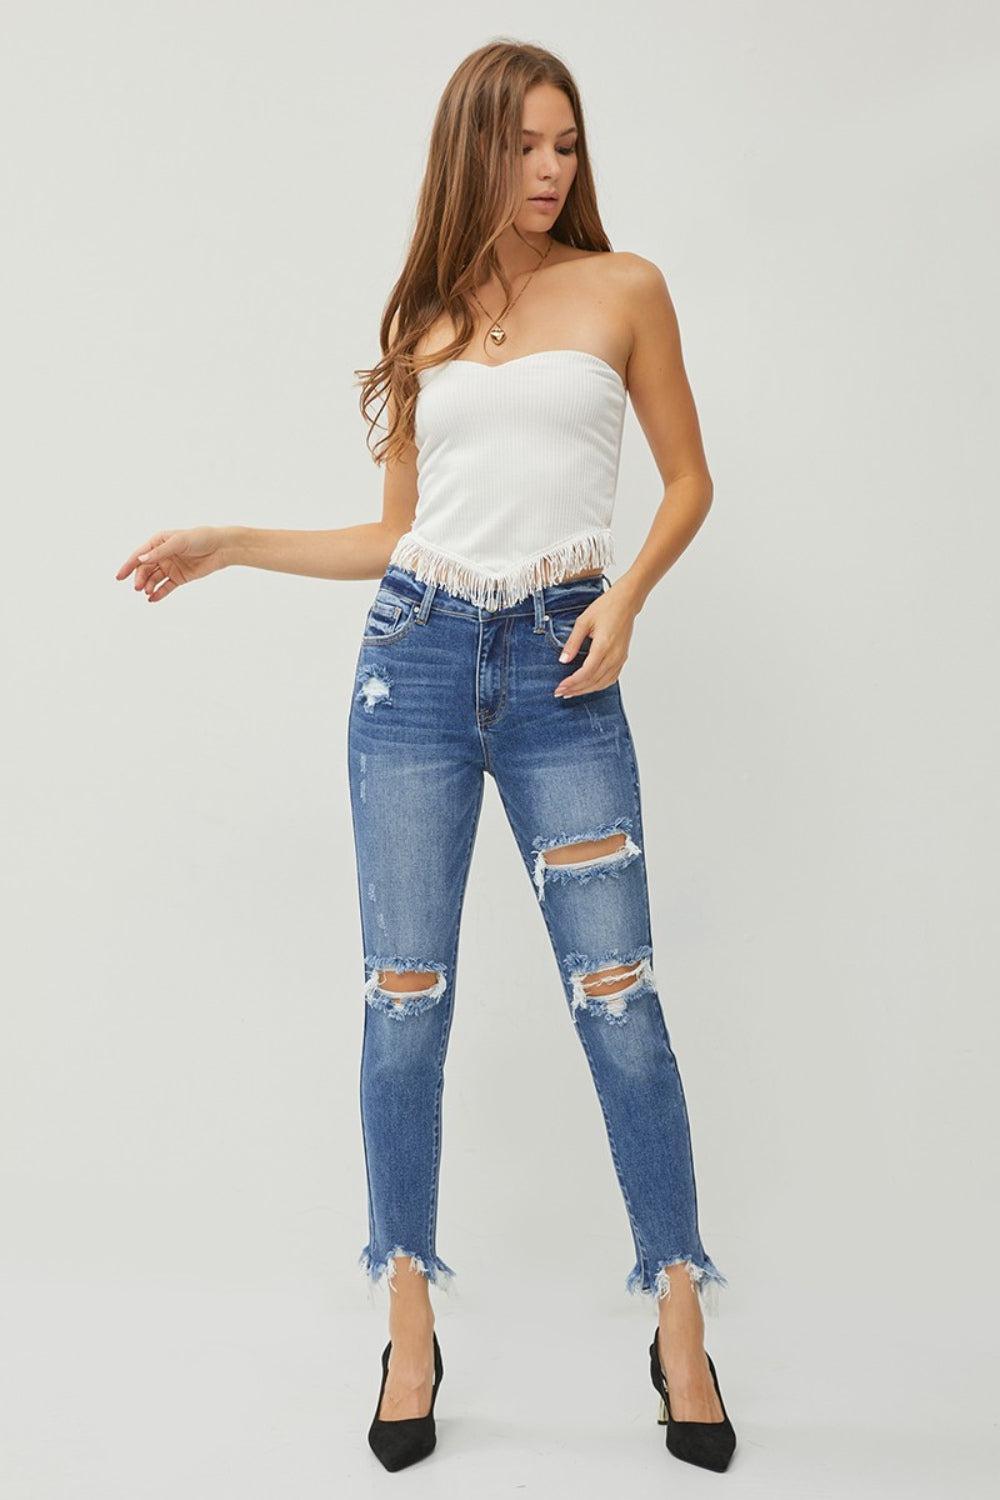 a woman wearing a white top and ripped jeans